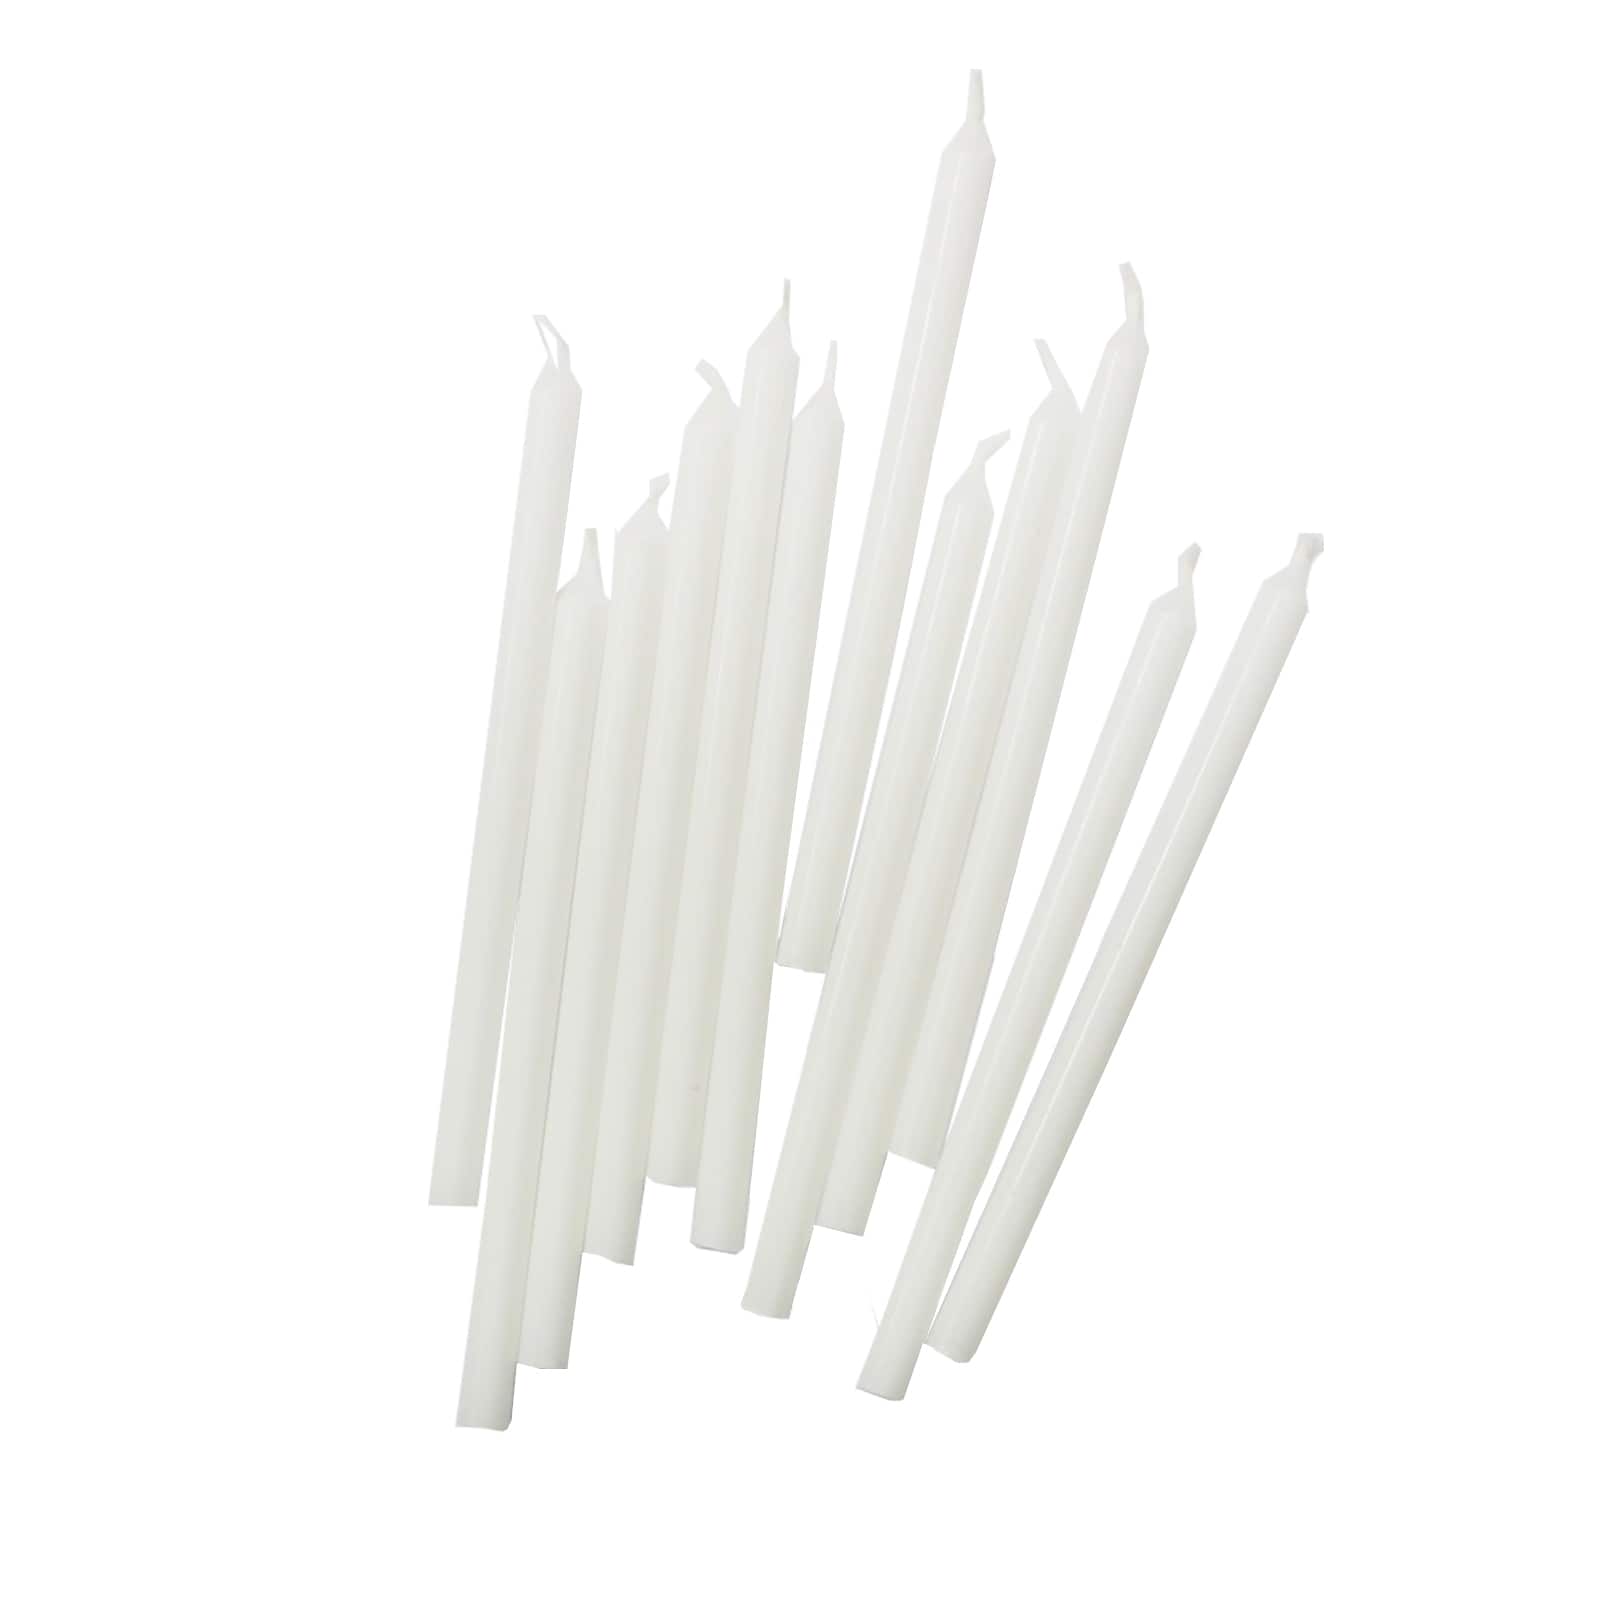 12 Packs: 12 ct. (144 total) White Candles by Celebrate It&#xAE;